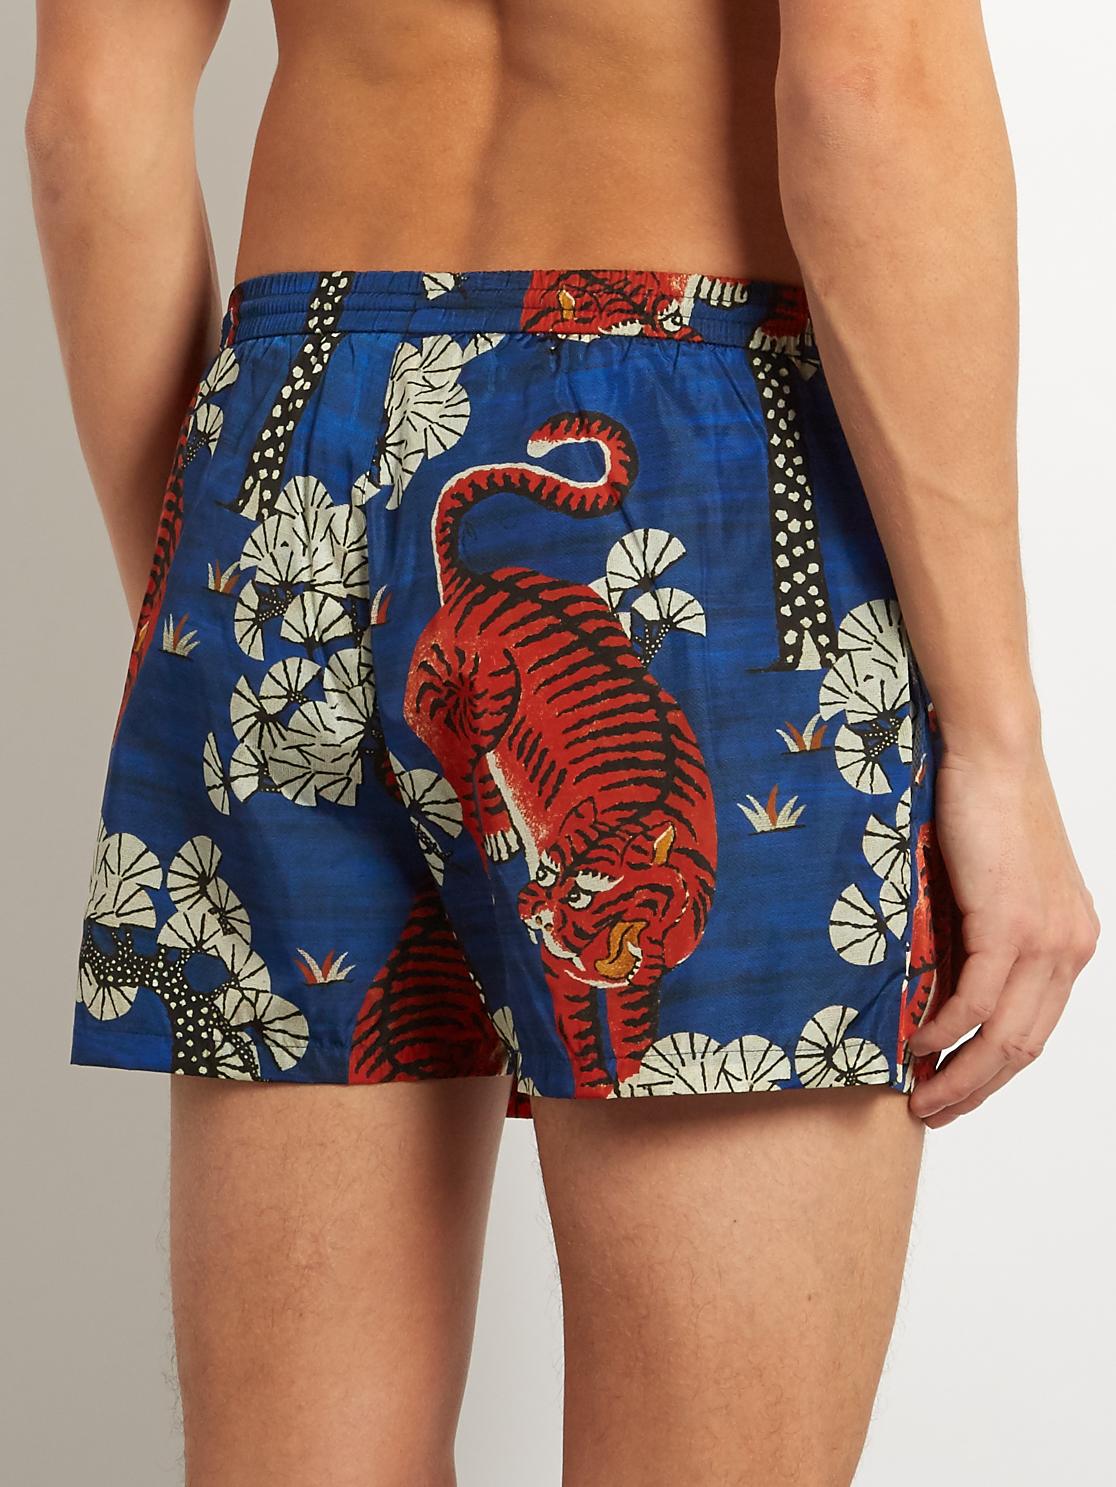 Gucci Bengal-print Swim Shorts in Blue for Men - Lyst